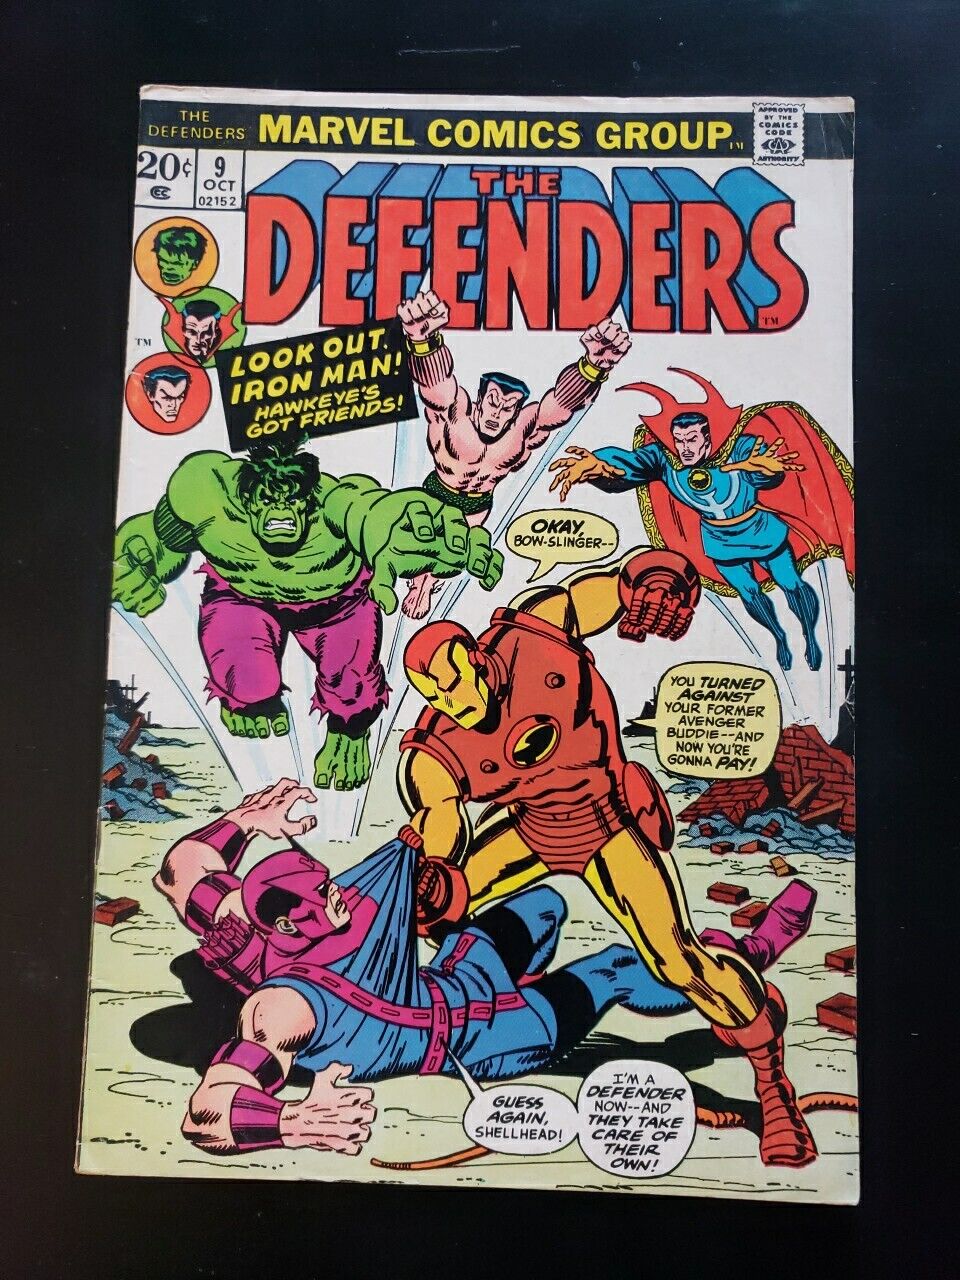 The Defenders #9 (1973) FN+ Avengers, Doctor Strange, Iron Man, Scarlet Witch